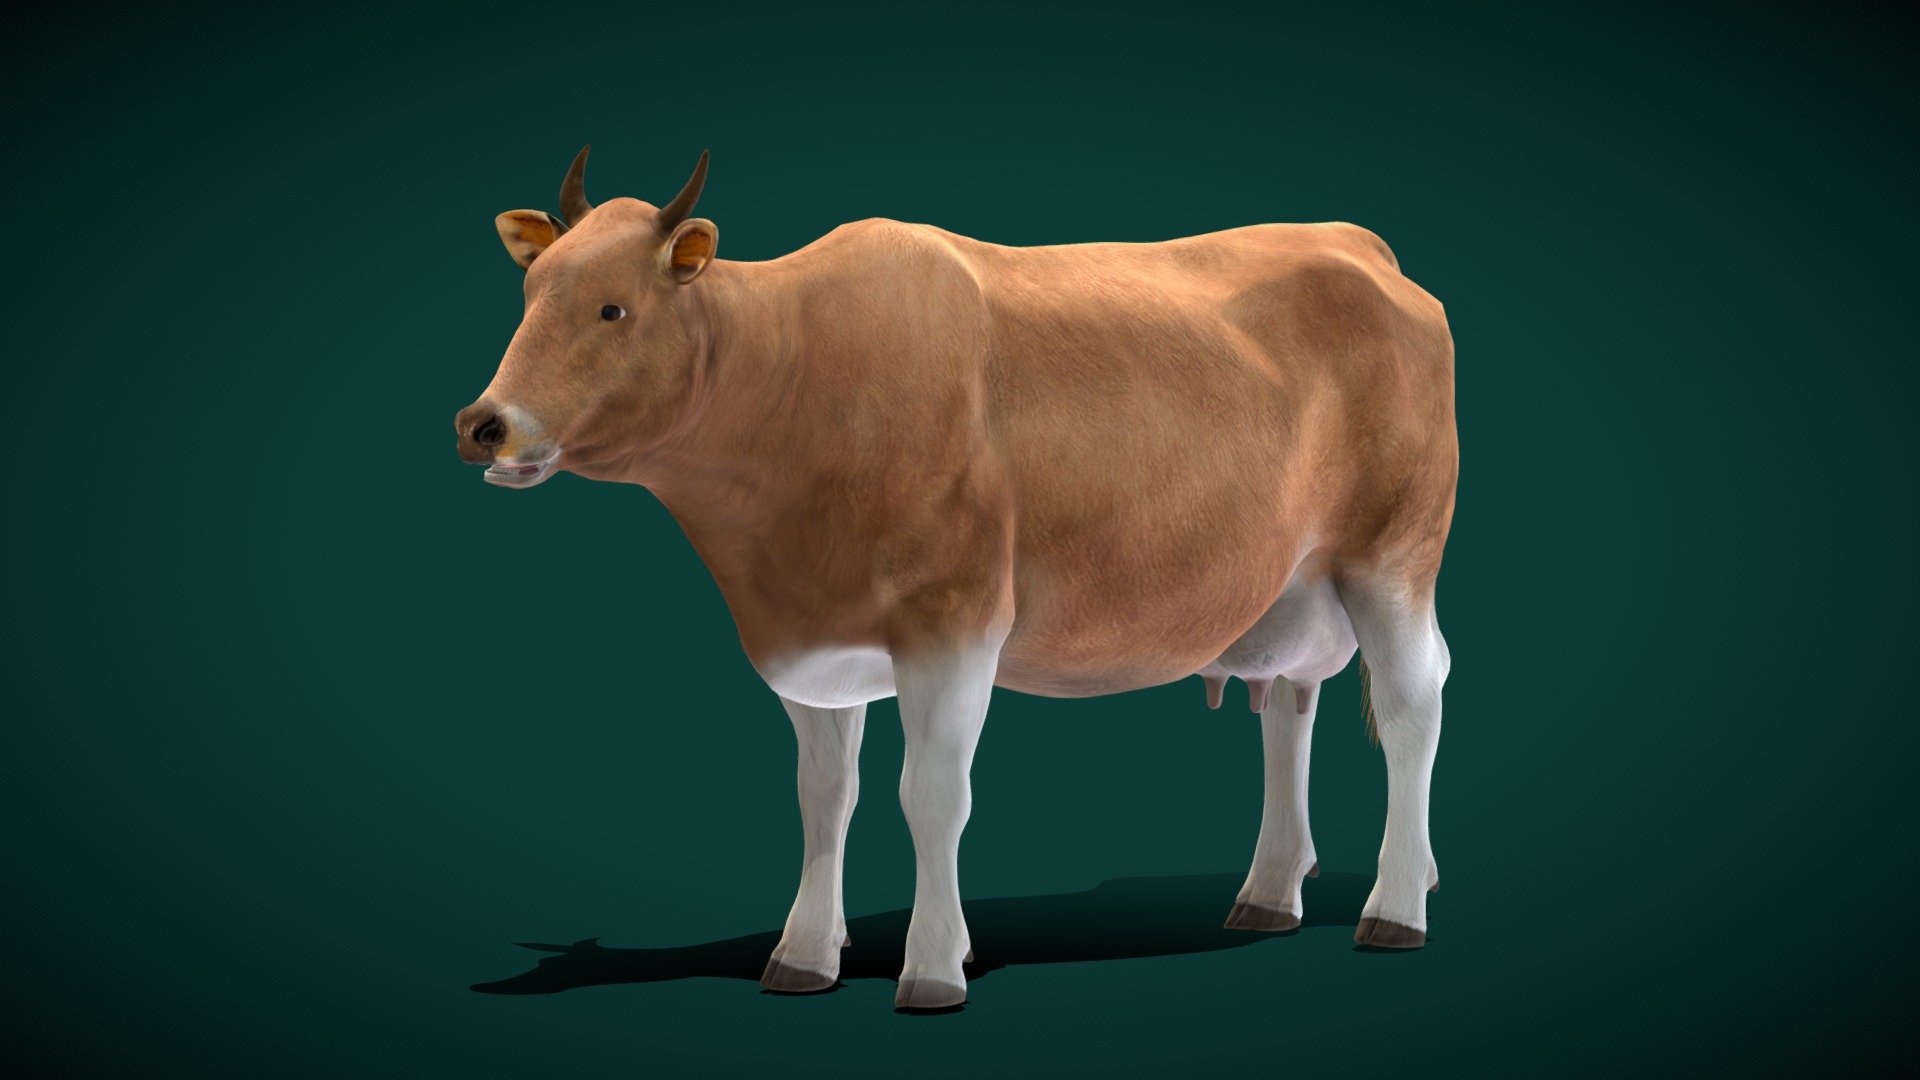 Javan_Banteng_Cattle (wild cattle species)  Tembadau

Bos Javanicus Animal  Mammal (Endangered)

1 Draw Calls

GameReady

Subdivision Surface Ready

12 Animations

4K PBR Textures  Materials 

Unreal FBX (Unreal 4,5 Plus)

Unity FBX  

Blend File 3.6.5 LTS

USDZ File (AR Ready). Real Scale Dimension

Textures Files

GLB File (Unreal 5.1  Plus Native Support)


Gltf File ( Spark AR, Lens Studio(SnapChat) , Effector(Tiktok) , Spline, Play Canvas,Omiverse ) Compatible




Triangles : 30604



Vertices  : 16465

Faces     : 30075

Edges     : 46350

Diffuse, Metallic, Roughness , Normal Map ,Specular Map,AO,

The Javan banteng (Bos javanicus) is a wild cattle species native to the Asian jungles. 
 They are also known as tembadau. 
 Banteng are similar in size and build to domestic cattle, but are typically larger and heavier. 
 Males are usually larger and have a darker coat 3d model